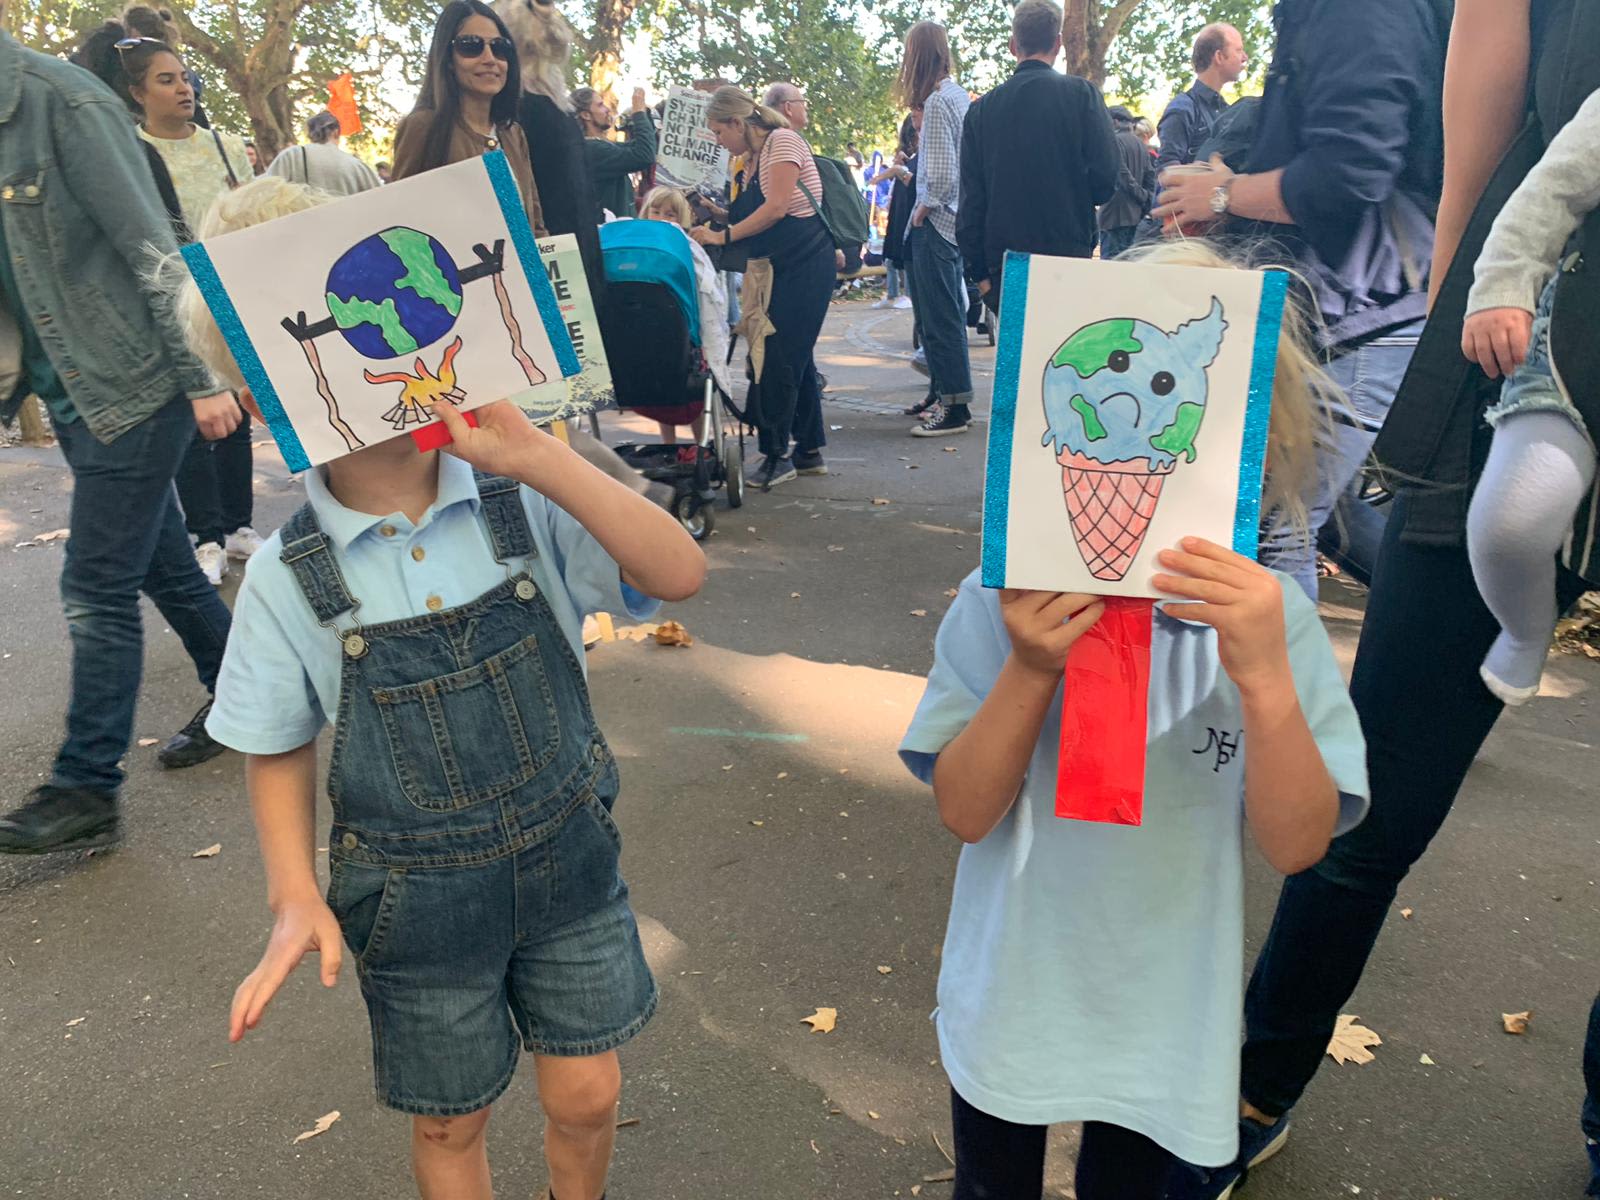 Etta and Artie Andrewes on a climate strike march, holding posters they've made to cover their faces